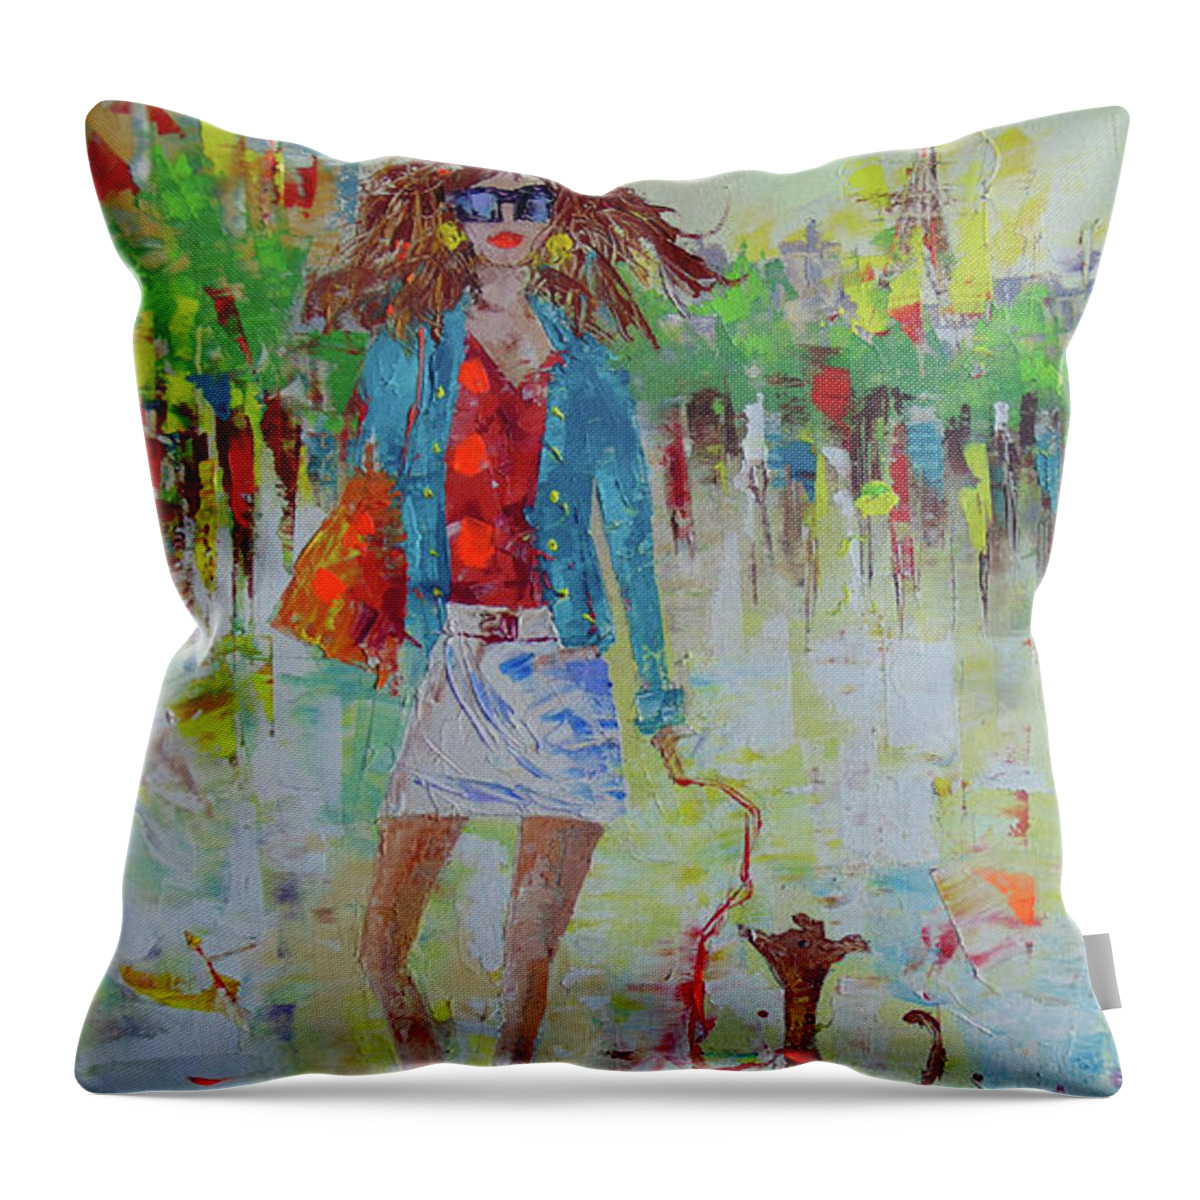 Paris Throw Pillow featuring the painting Promade avec mon chien by Frederic Payet